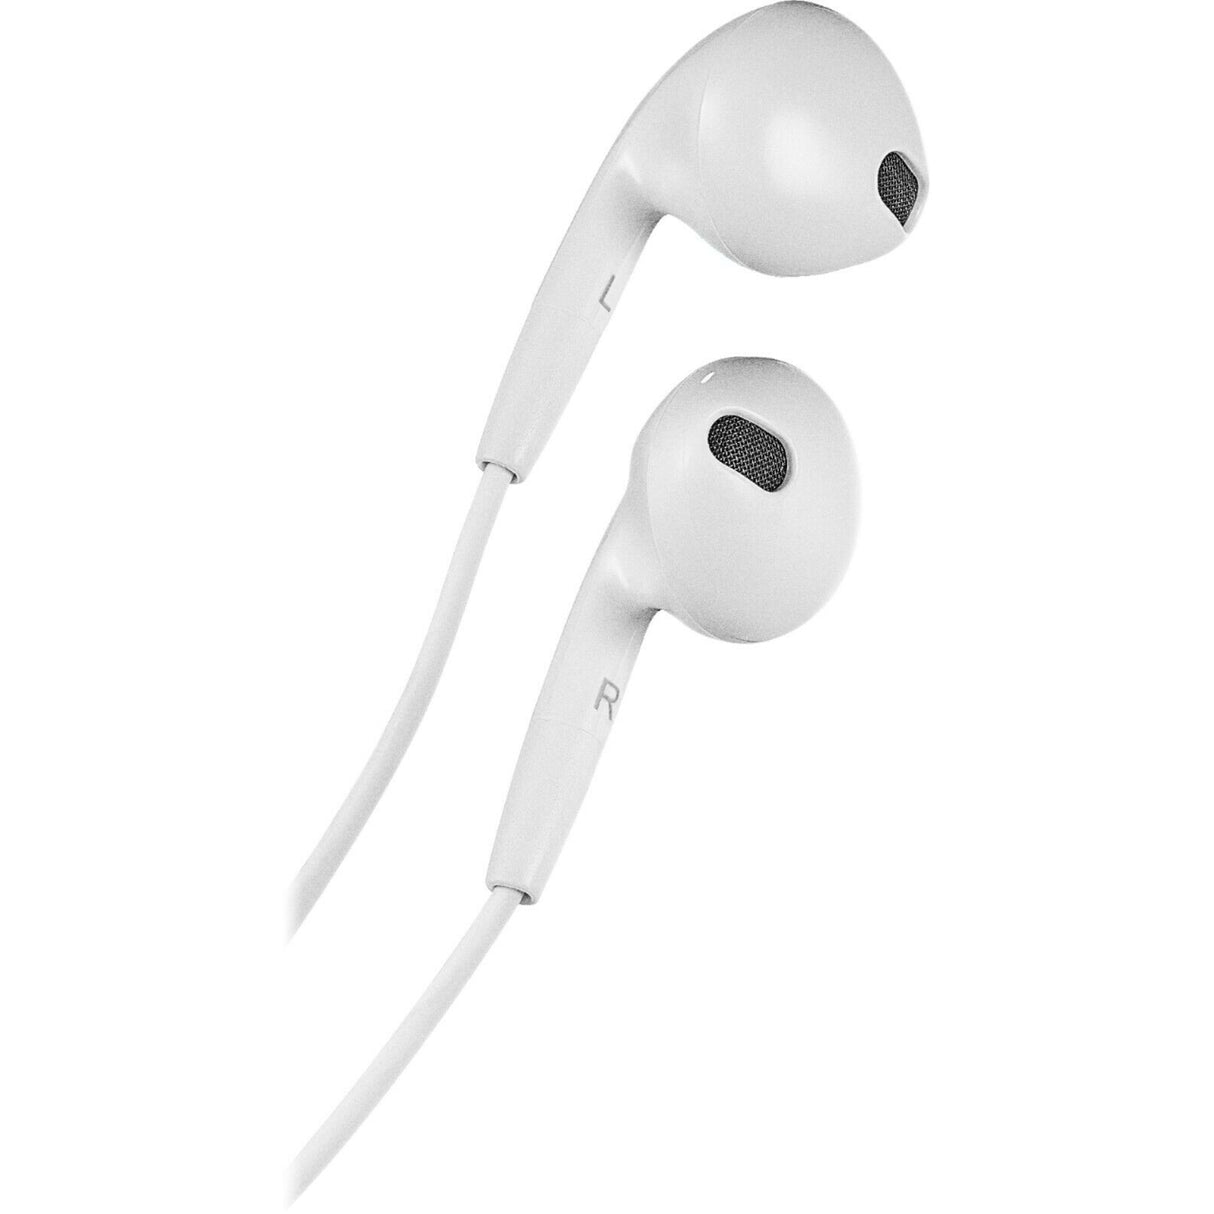 Insignia NS-CAHBTEP02 Wireless Bluetooth Earbuds - White